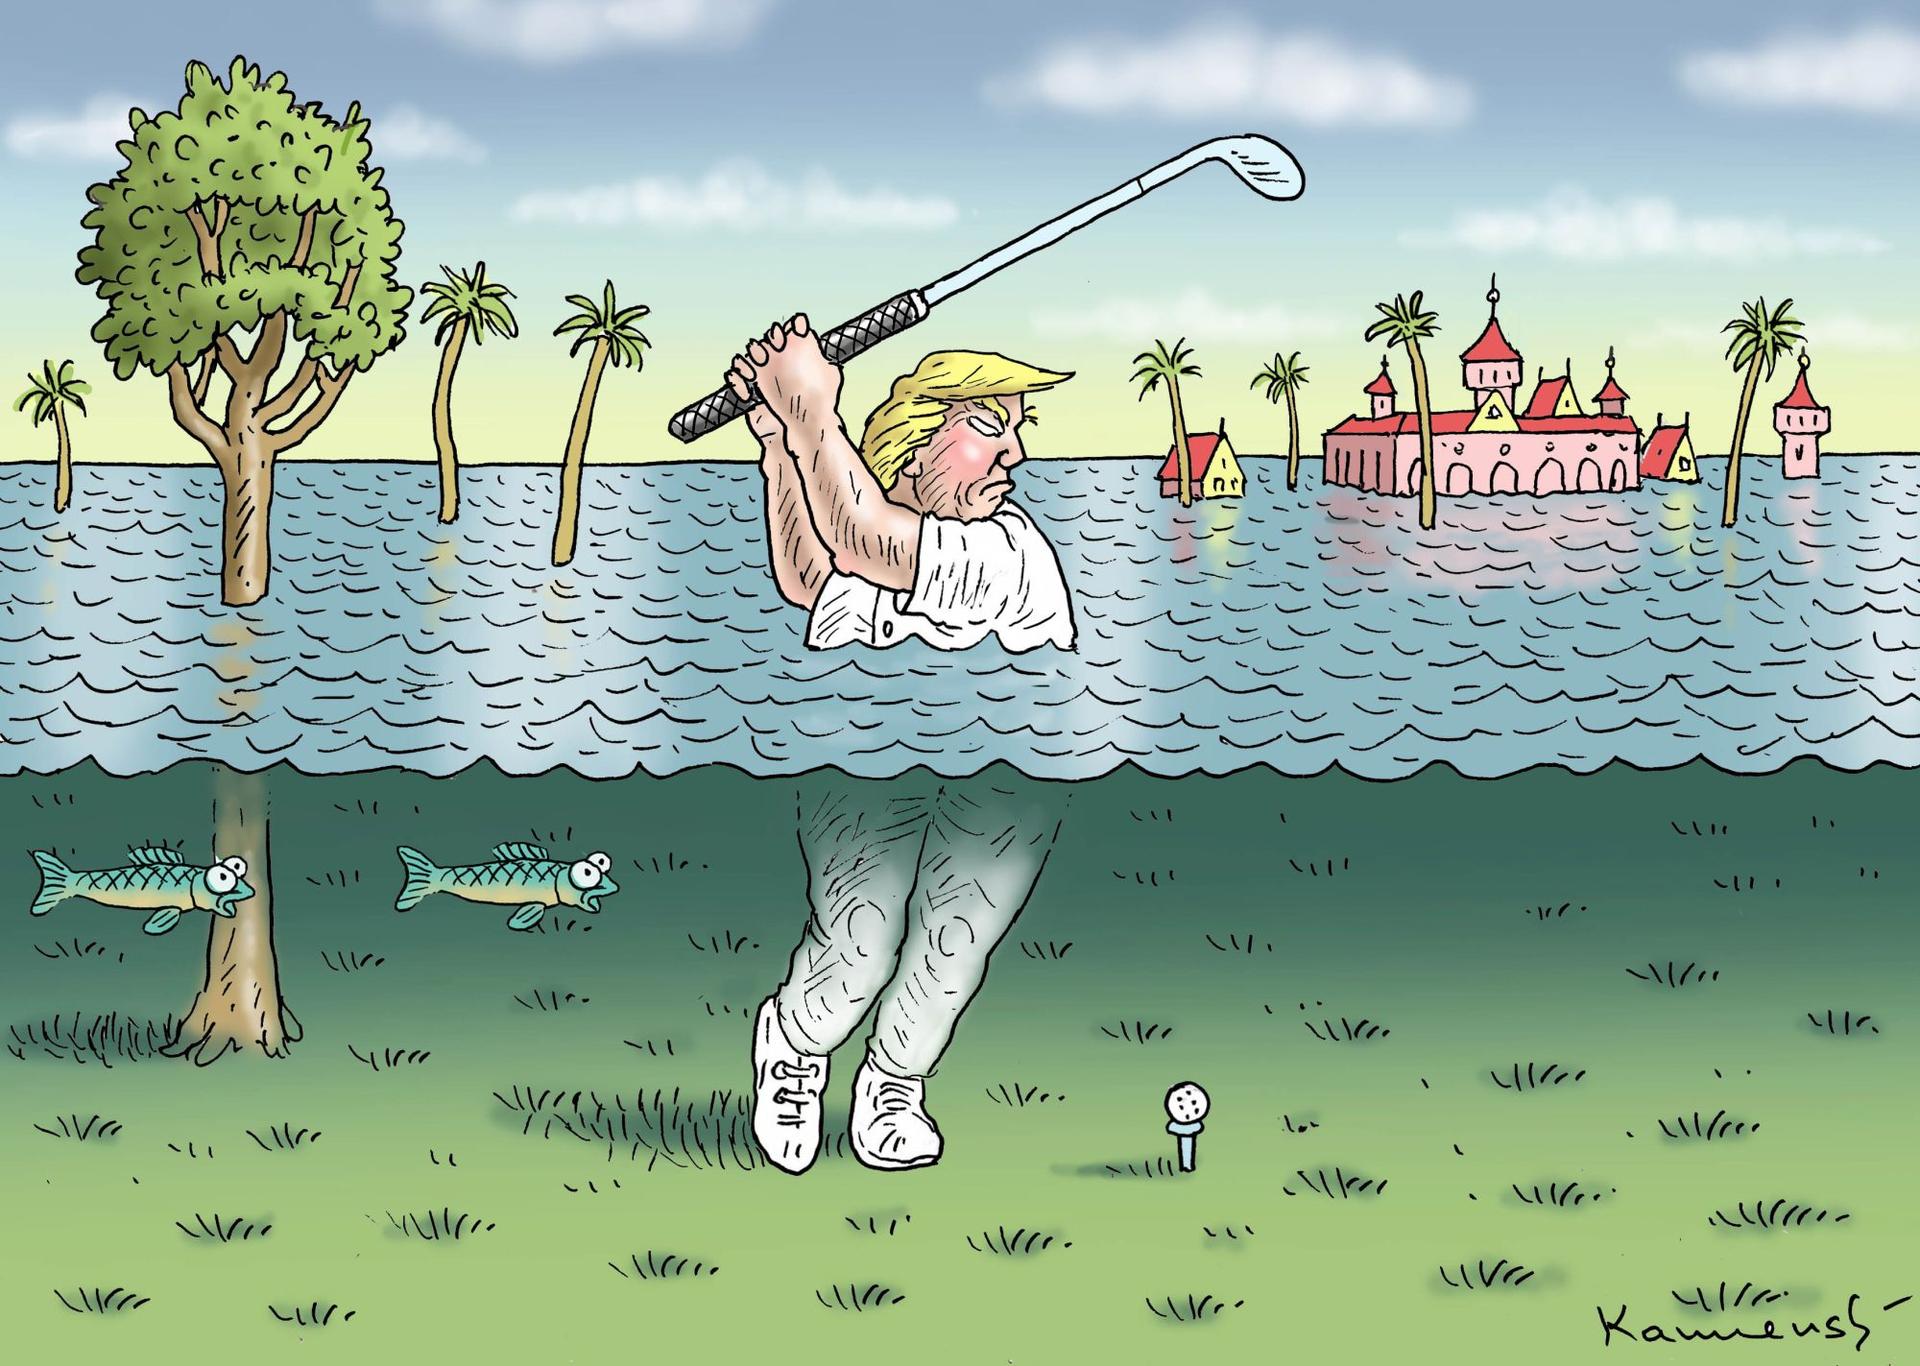 Trump playing golf underwater at Mar a Lago.